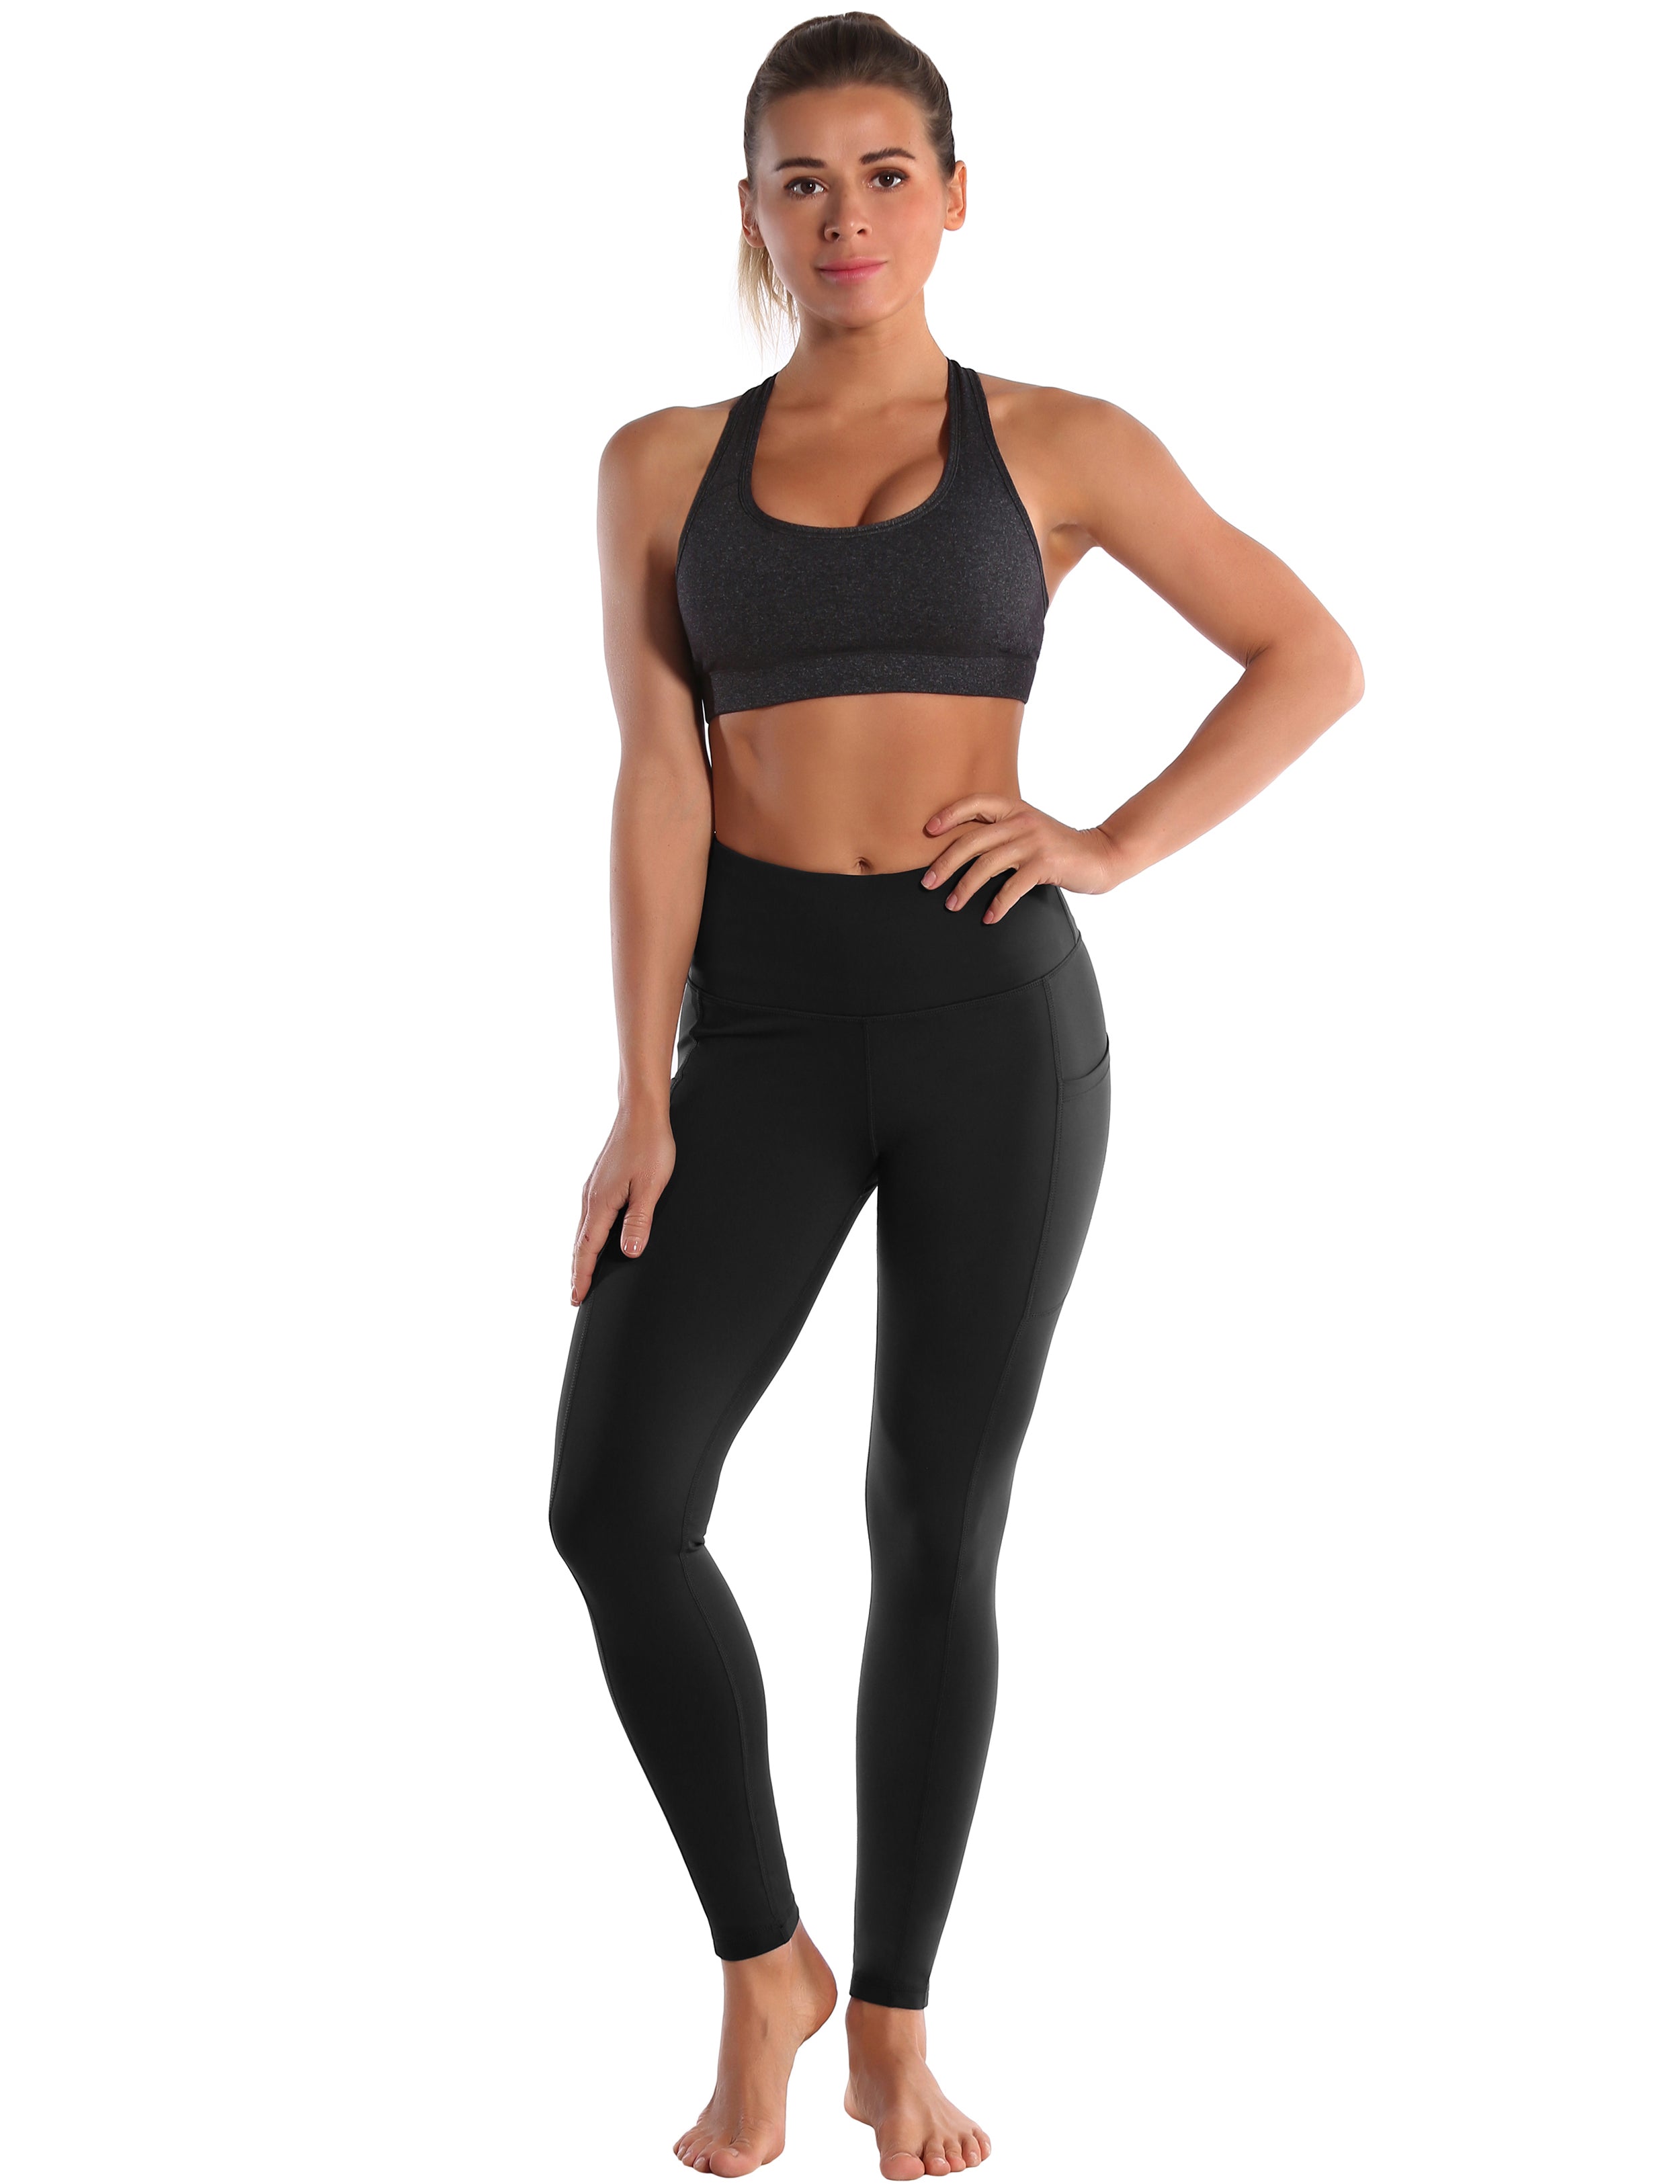 Hip Line Side Pockets Biking Pants black Sexy Hip Line Side Pockets 75%Nylon/25%Spandex Fabric doesn't attract lint easily 4-way stretch No see-through Moisture-wicking Tummy control Inner pocket Two lengths